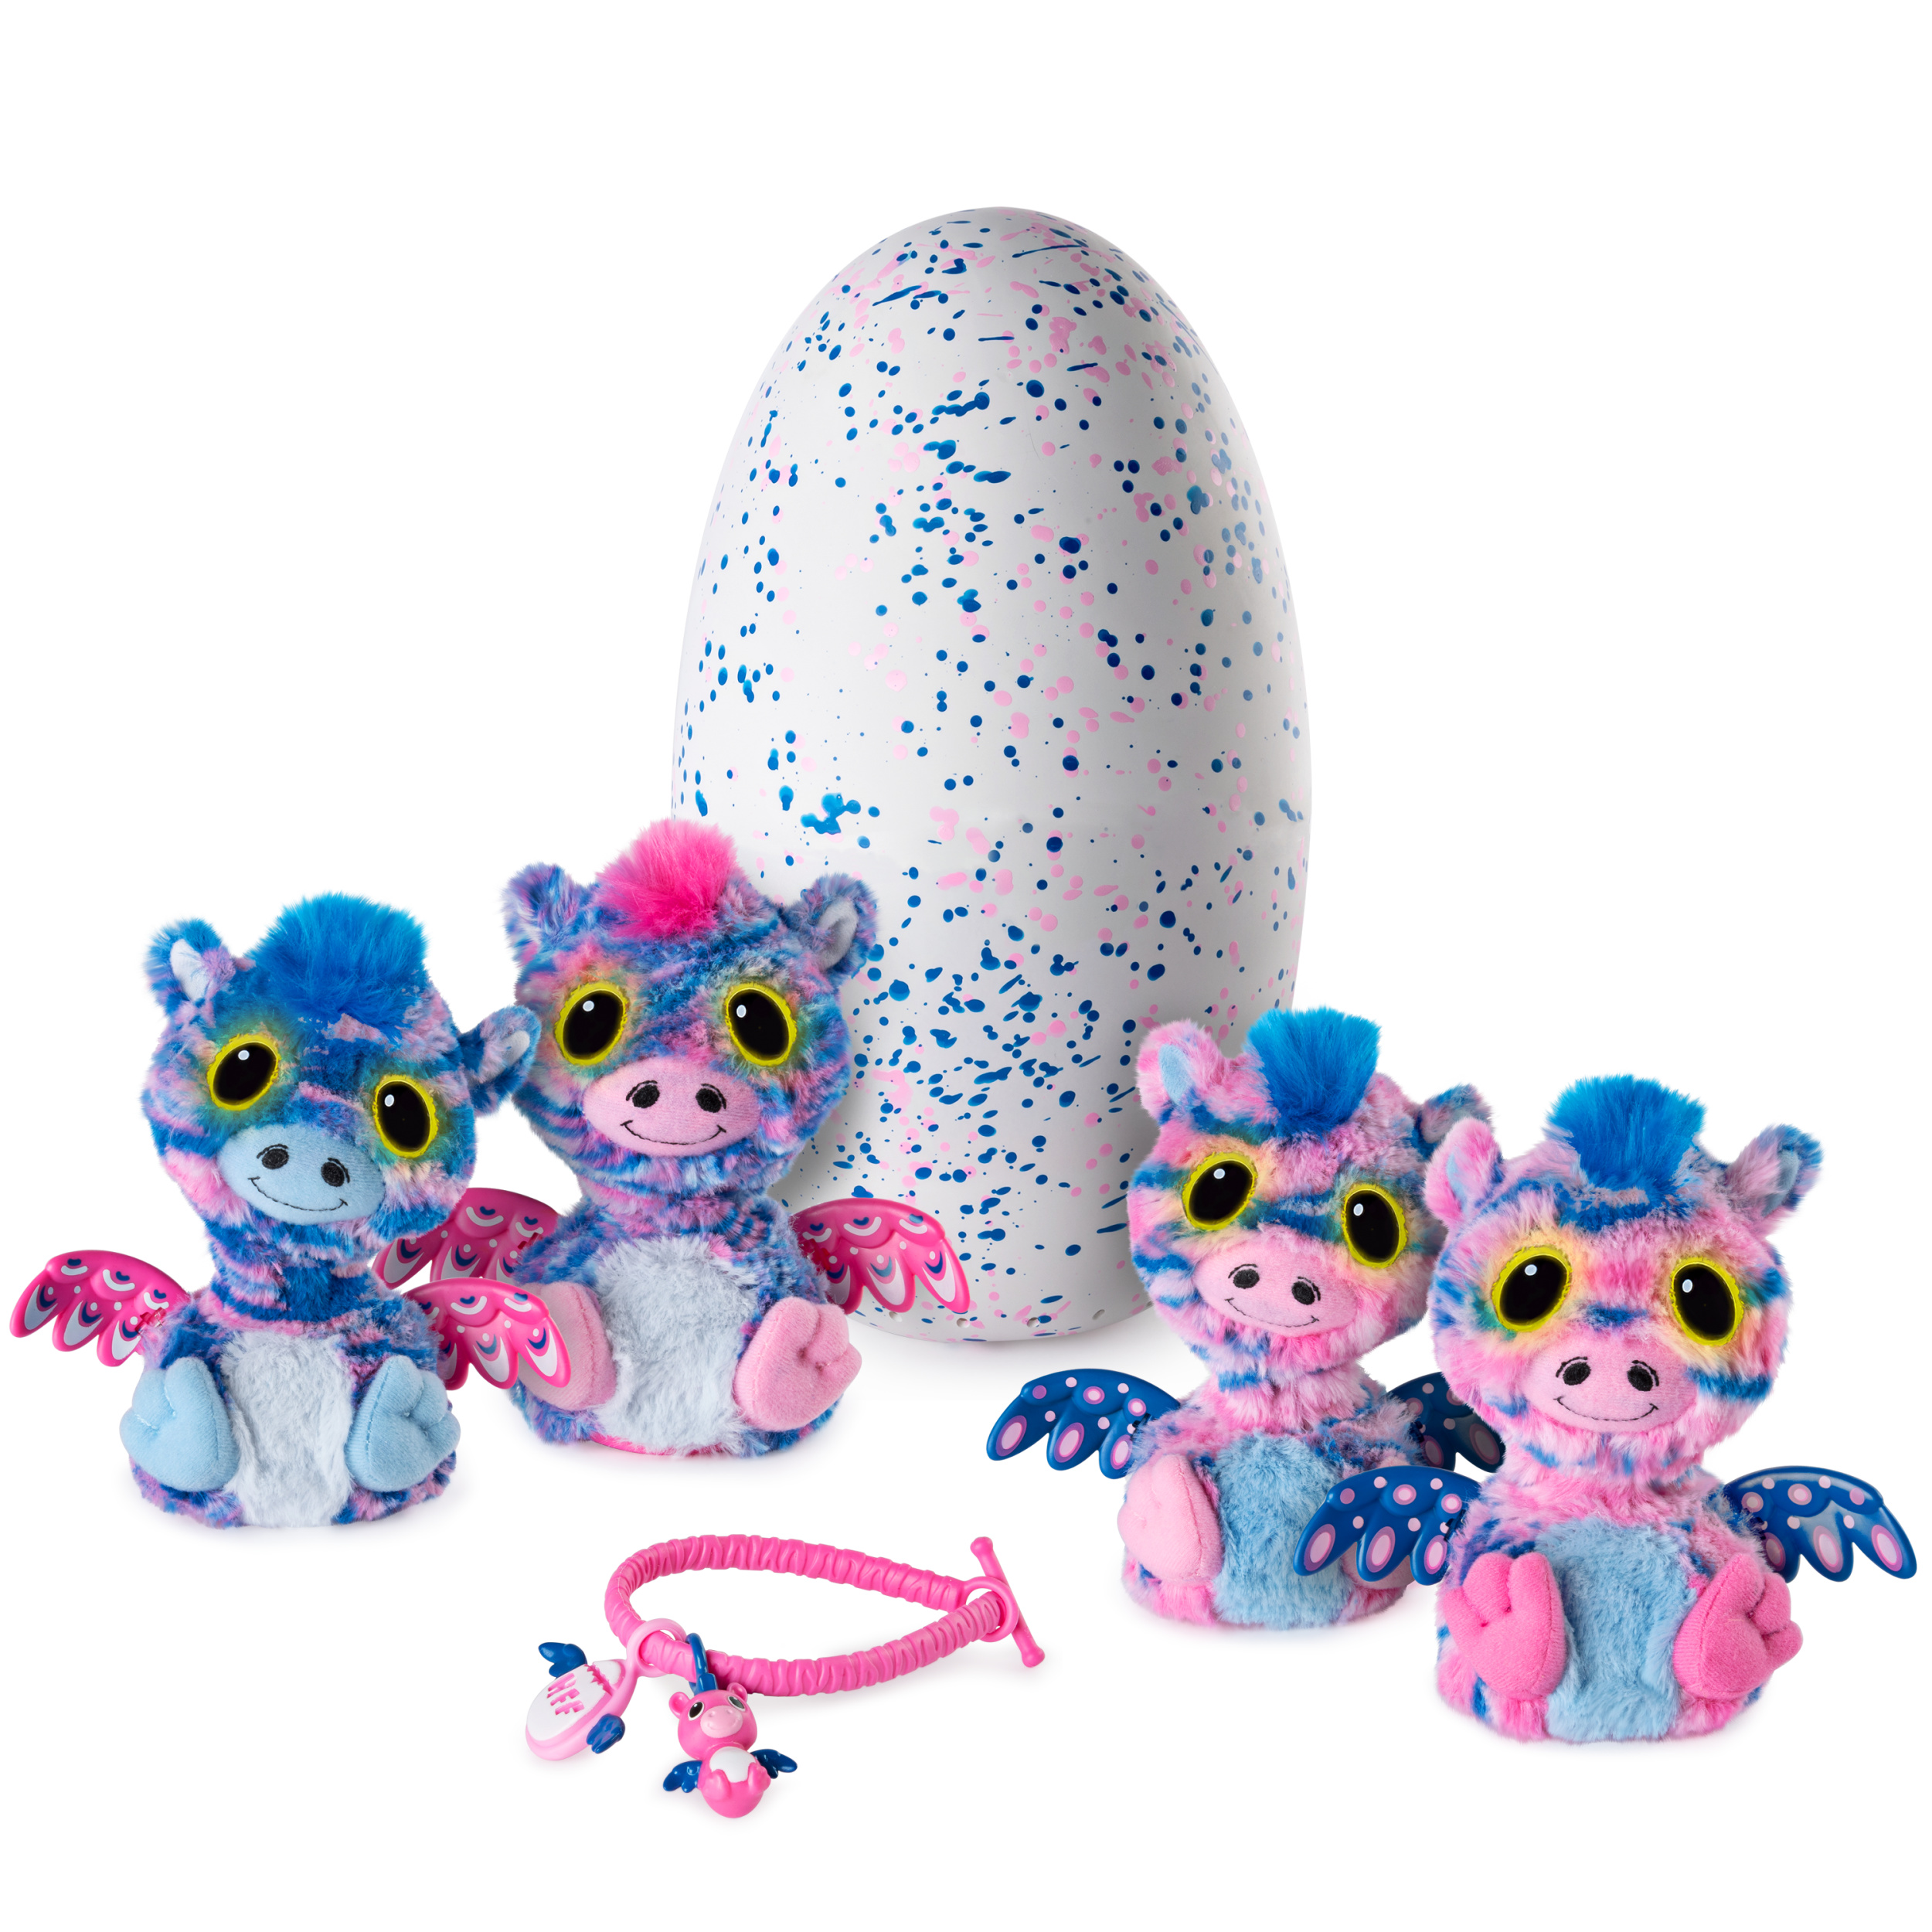 Hatchimals Surprise ? Zuffin ? Hatching Egg with Surprise Twin Interactive Hatchimal Creatures and Bracelet Accessory by Spin Master, Available Exclusively at Walmart - image 1 of 8